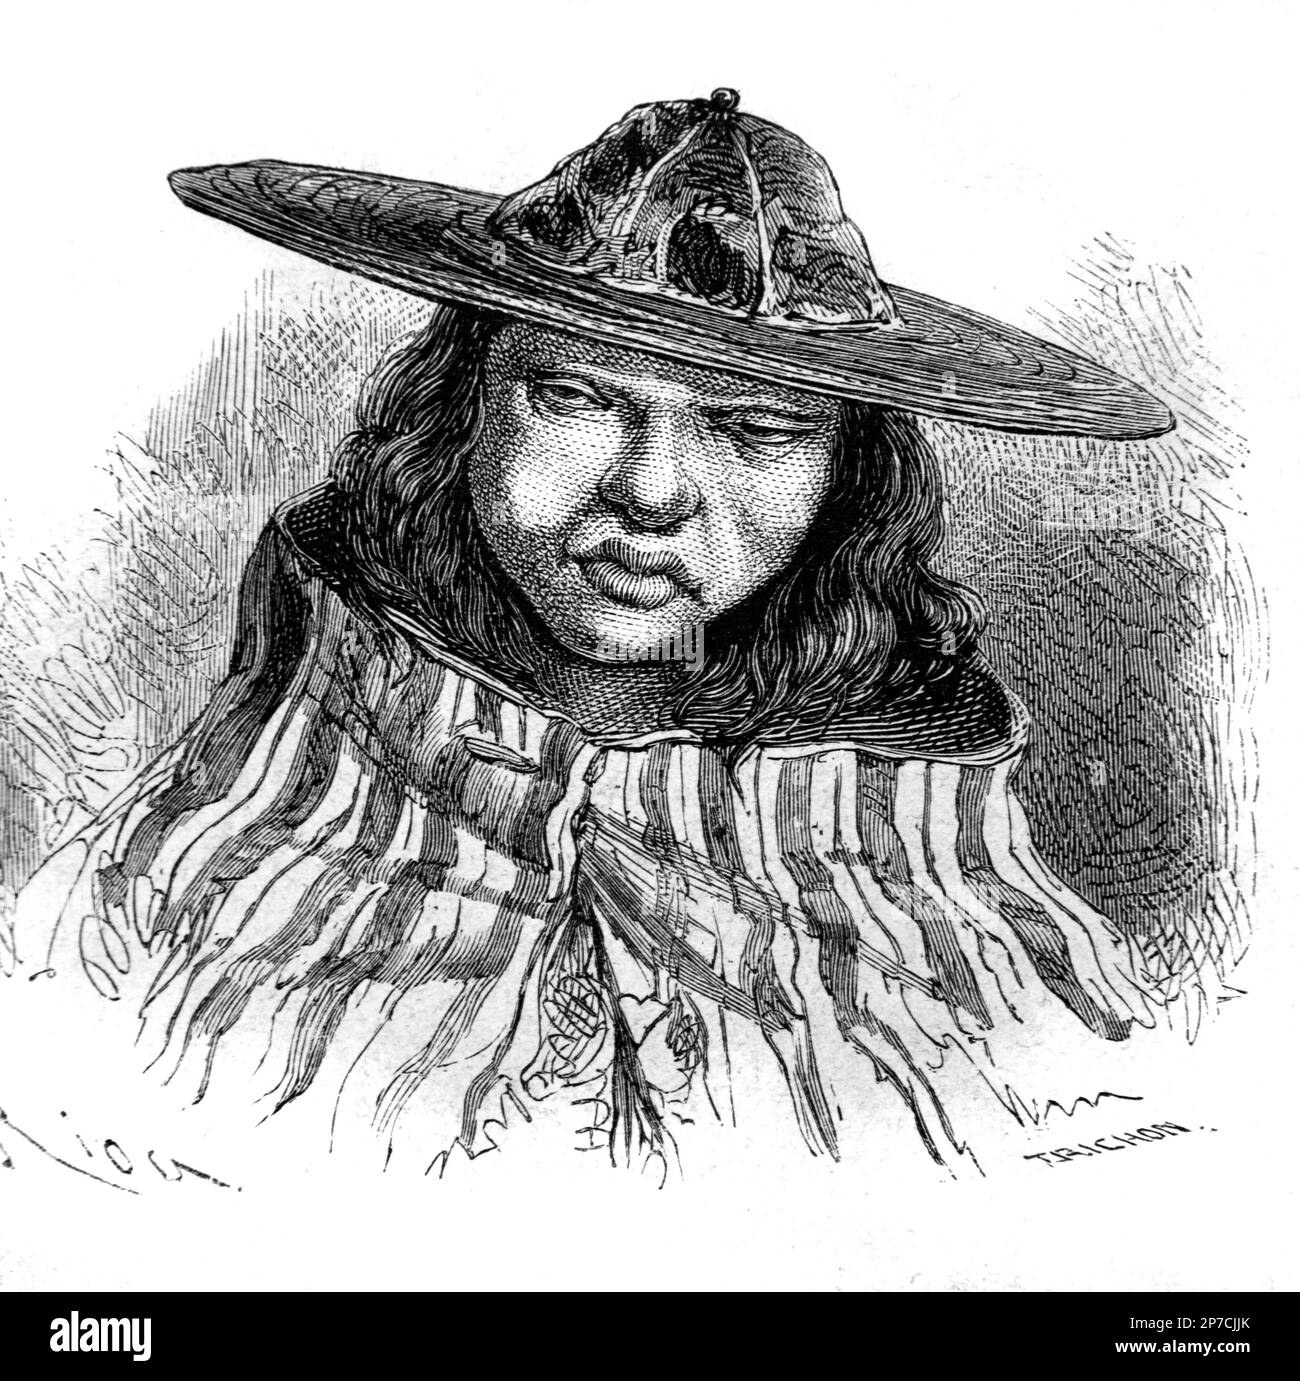 Portrait of Quechua Man, Indigenous People of South America, particularly Peru and Bolivia. Vintage or Historic Engraving or Illustration 1862 Stock Photo